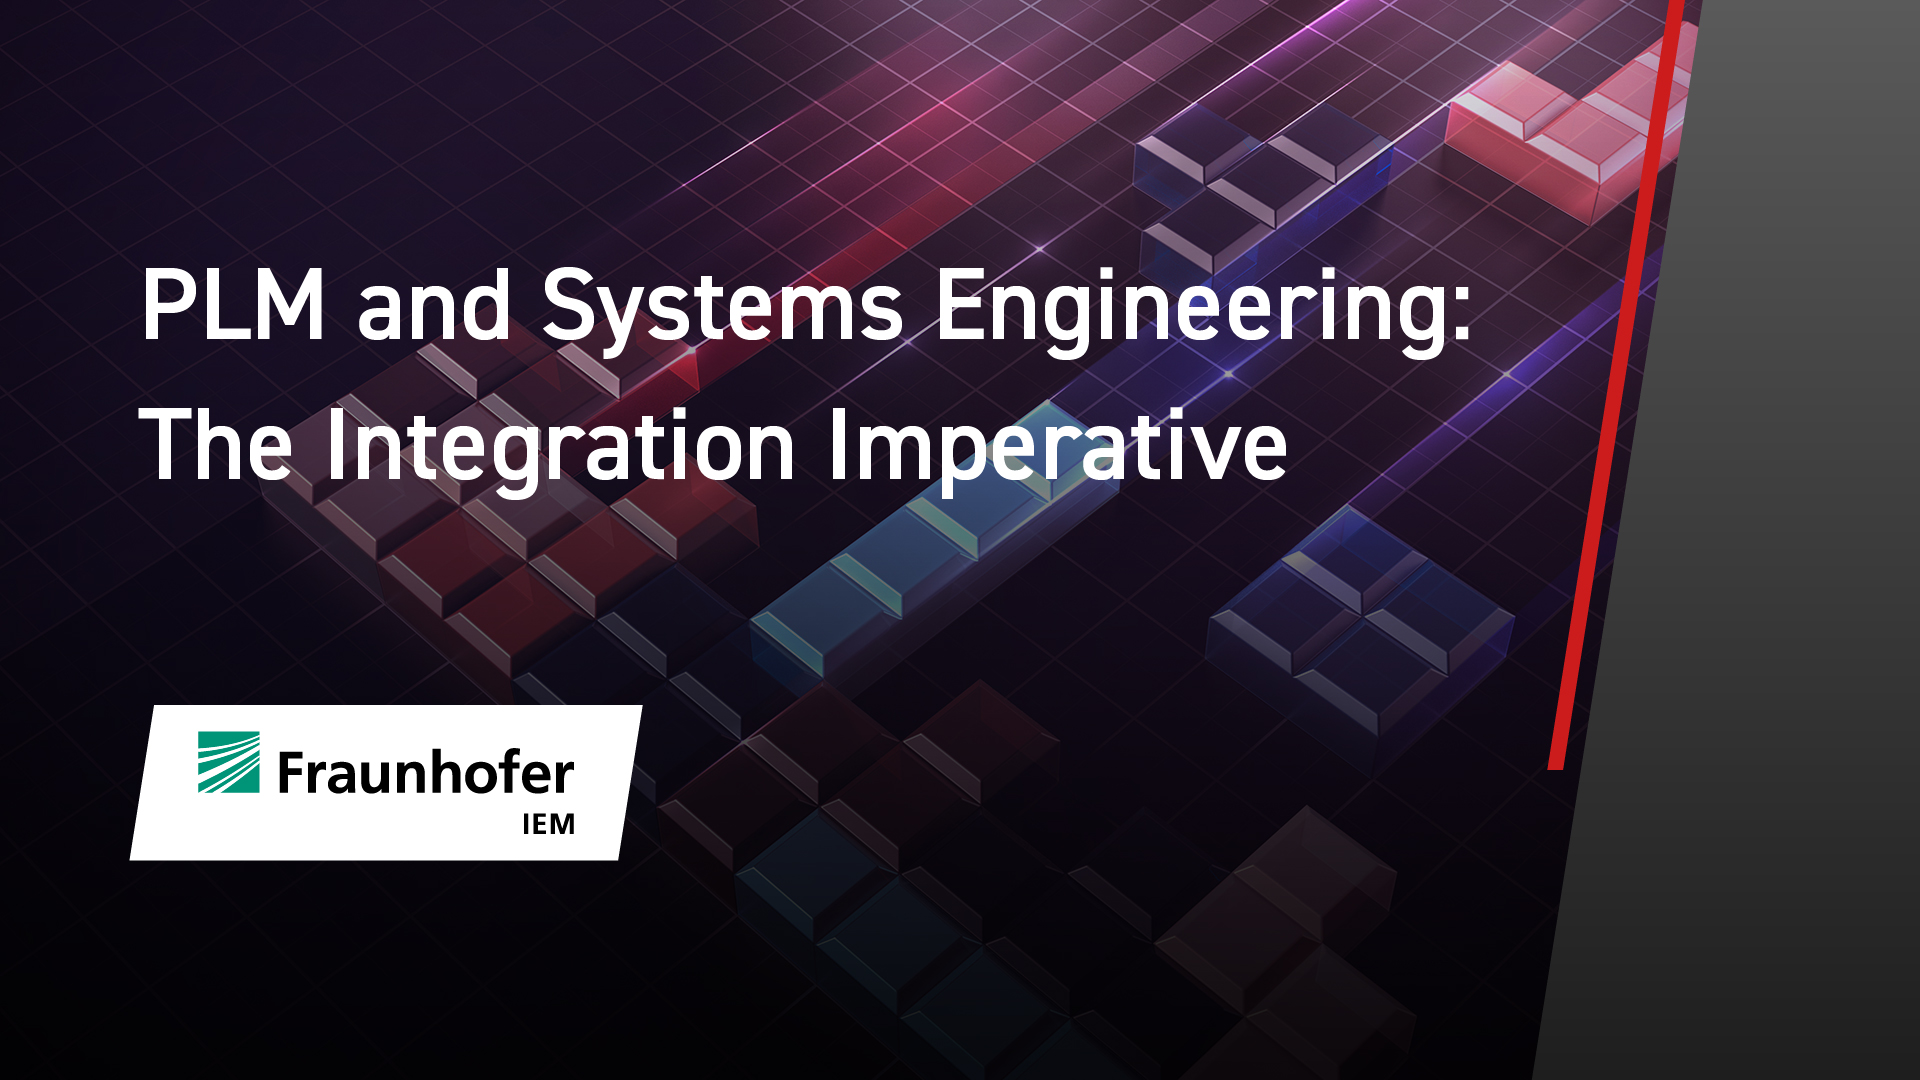 PLM and Systems Engineering: The Integration Imperative